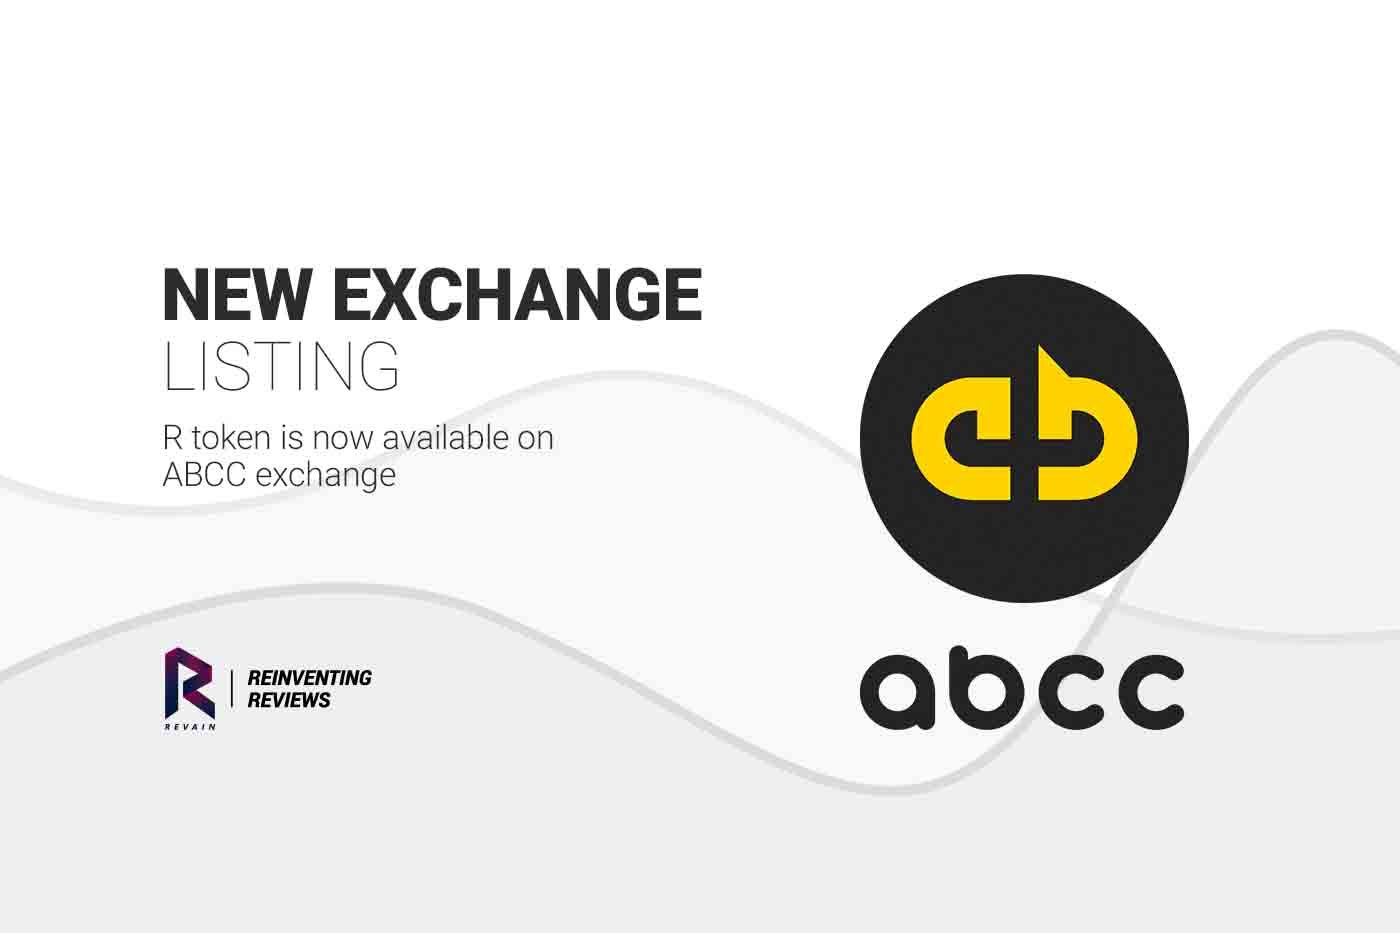 Article Revain has been listed on the ABCC exchange